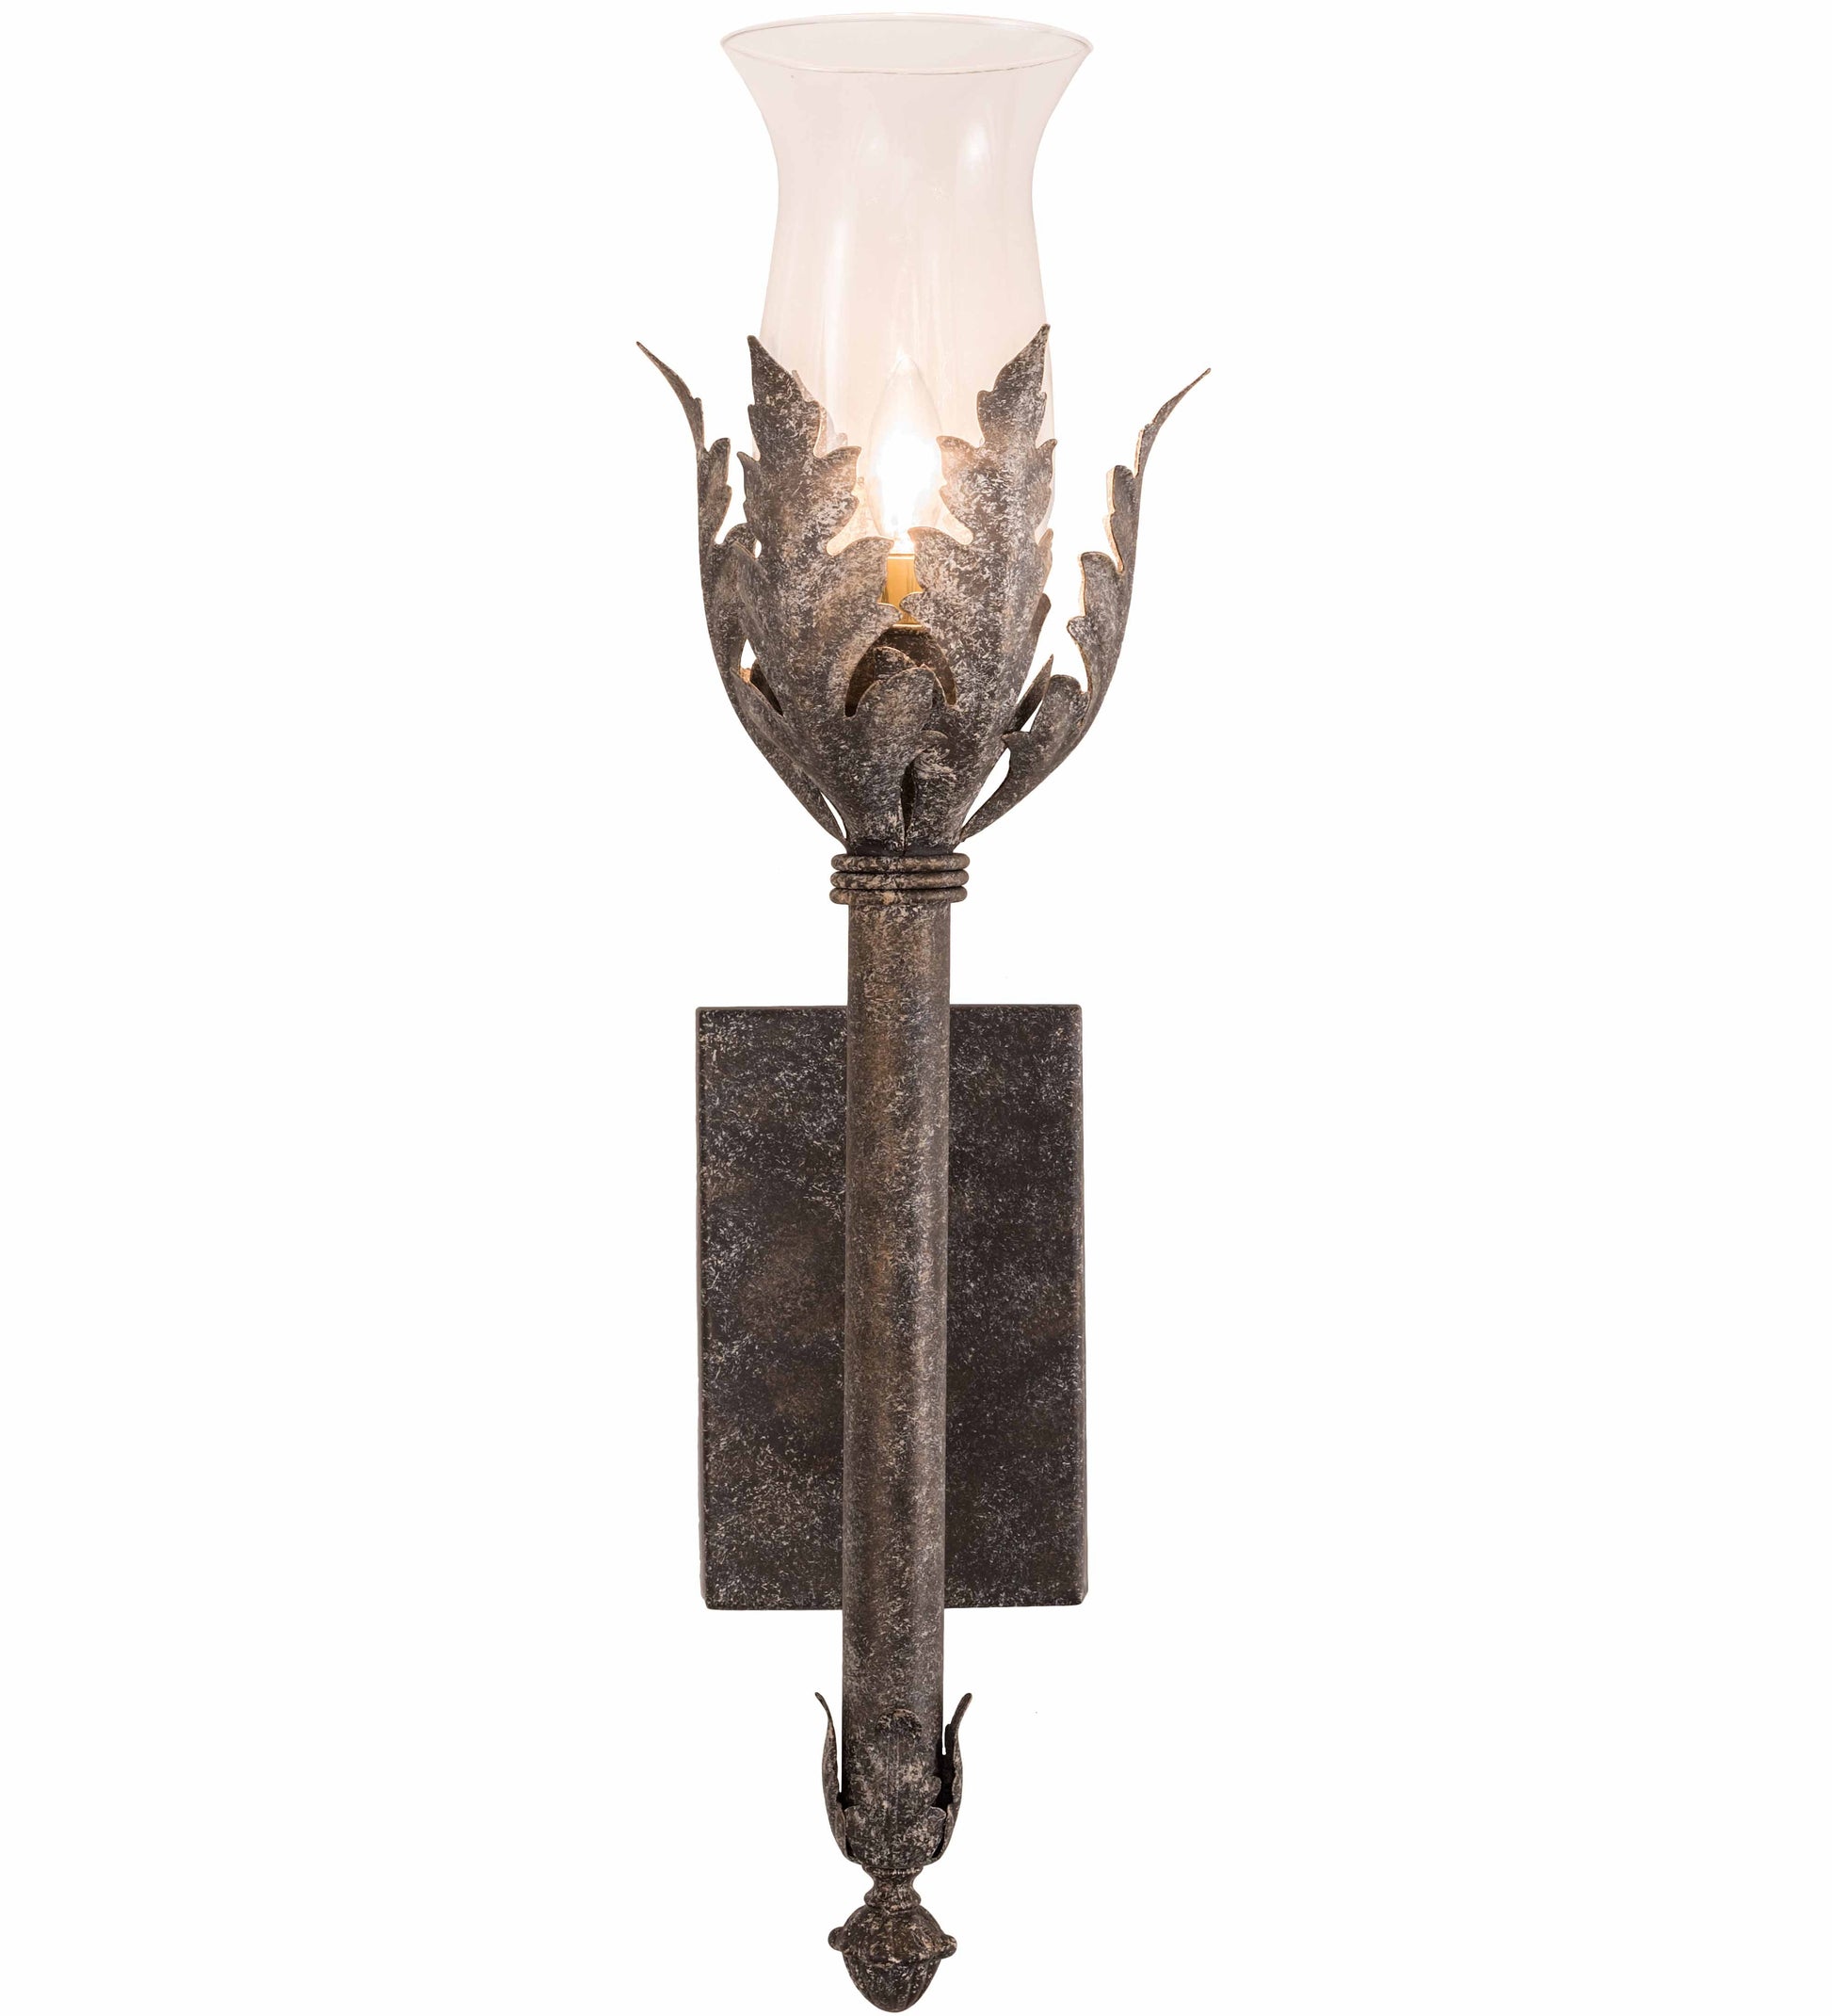 7" French Elegance Wall Sconce by 2nd Ave Lighting